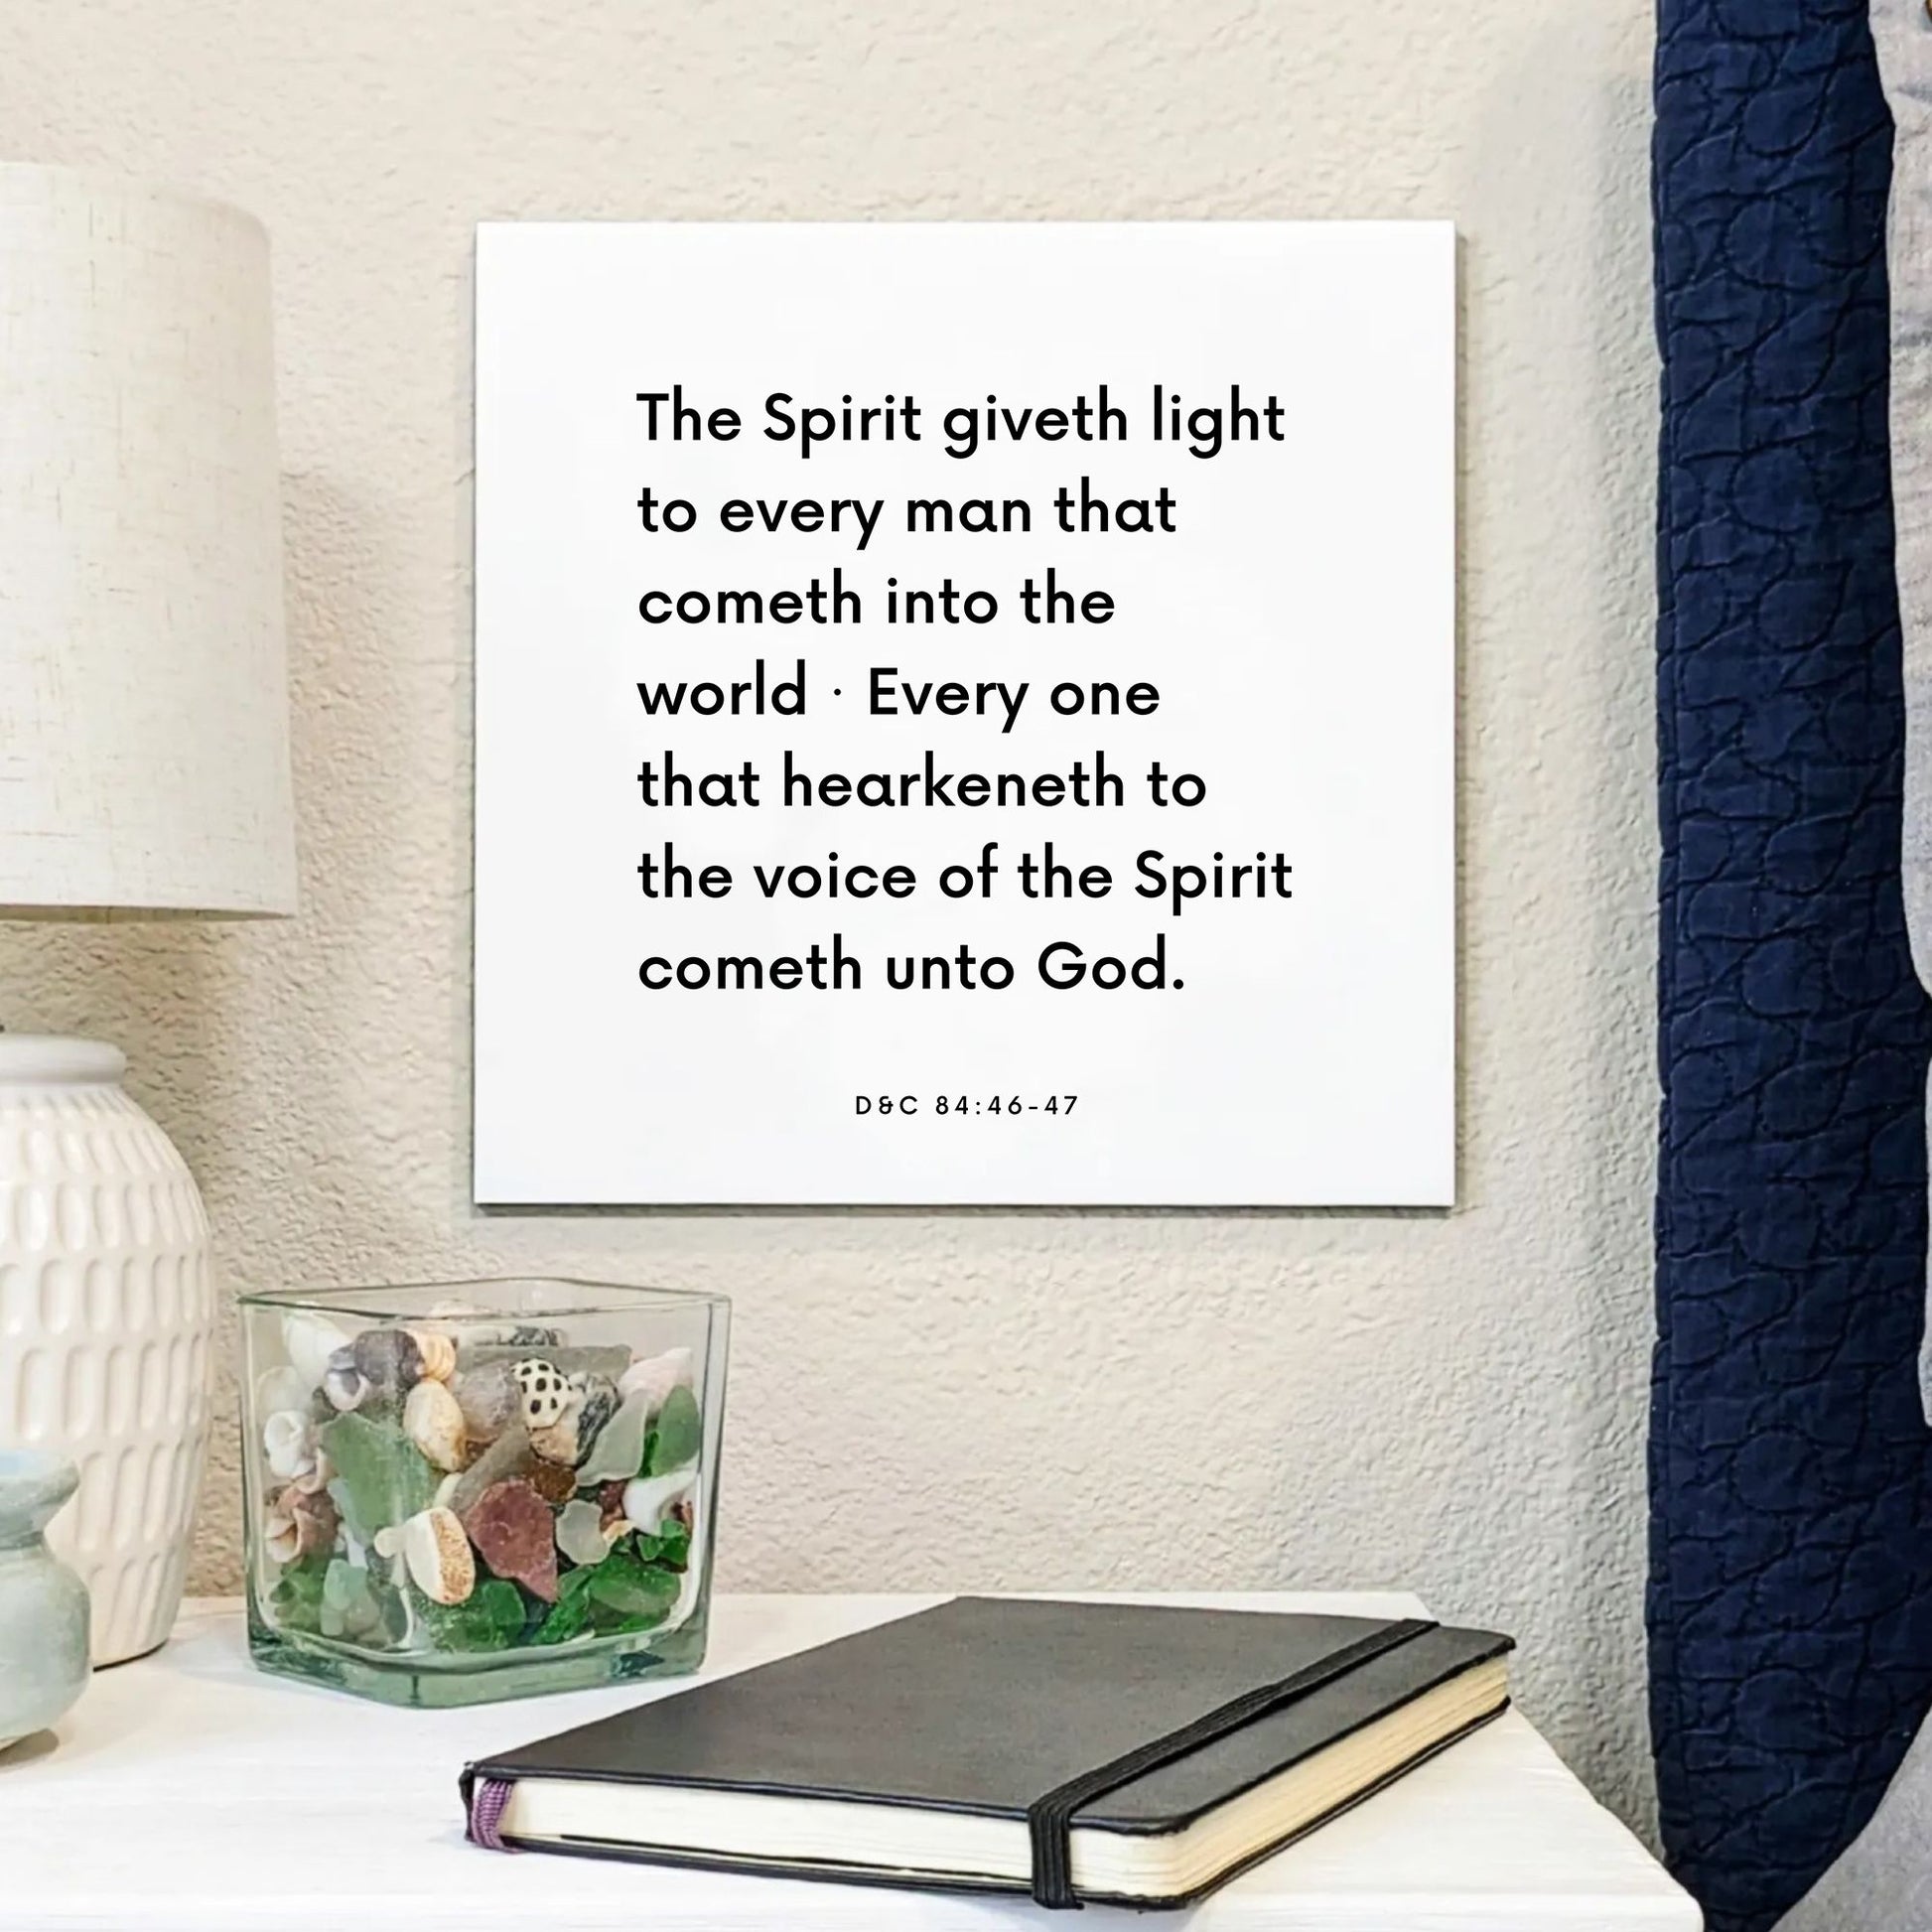 Bedside mouting of the scripture tile for D&C 84:46-47 - "The Spirit giveth light to every man"